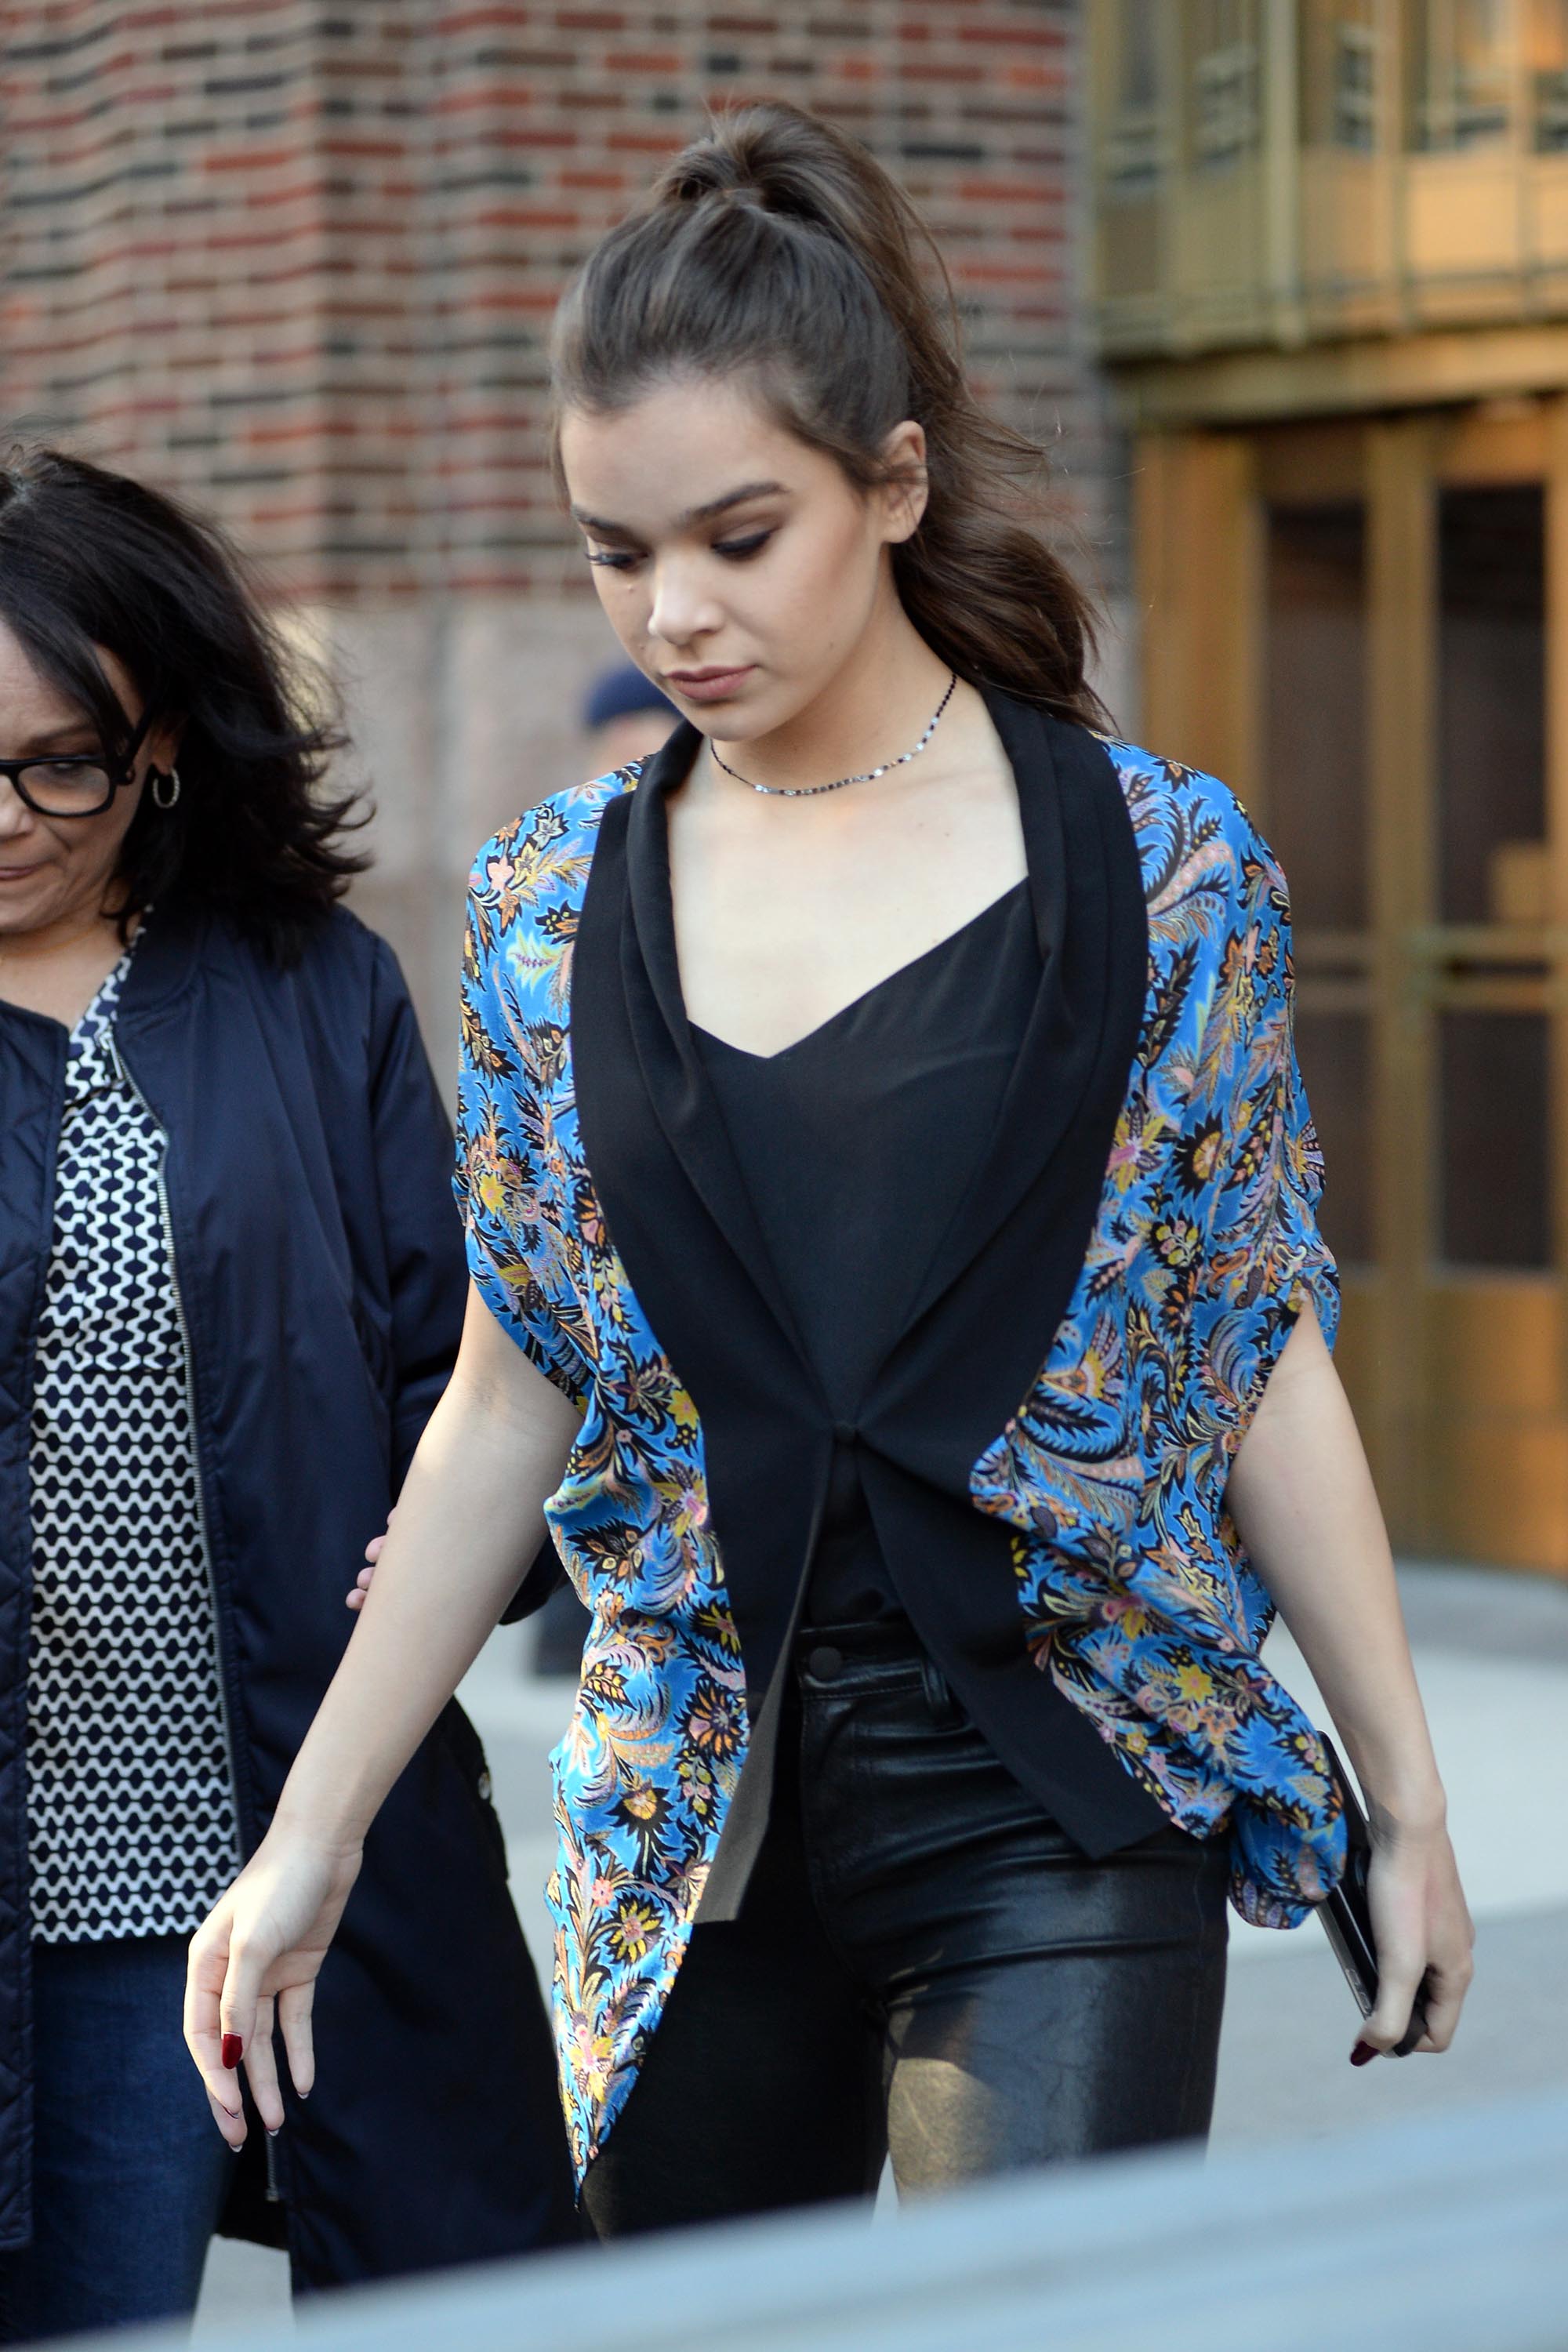 Hailee Steinfeld in NY Promoting Her New Single